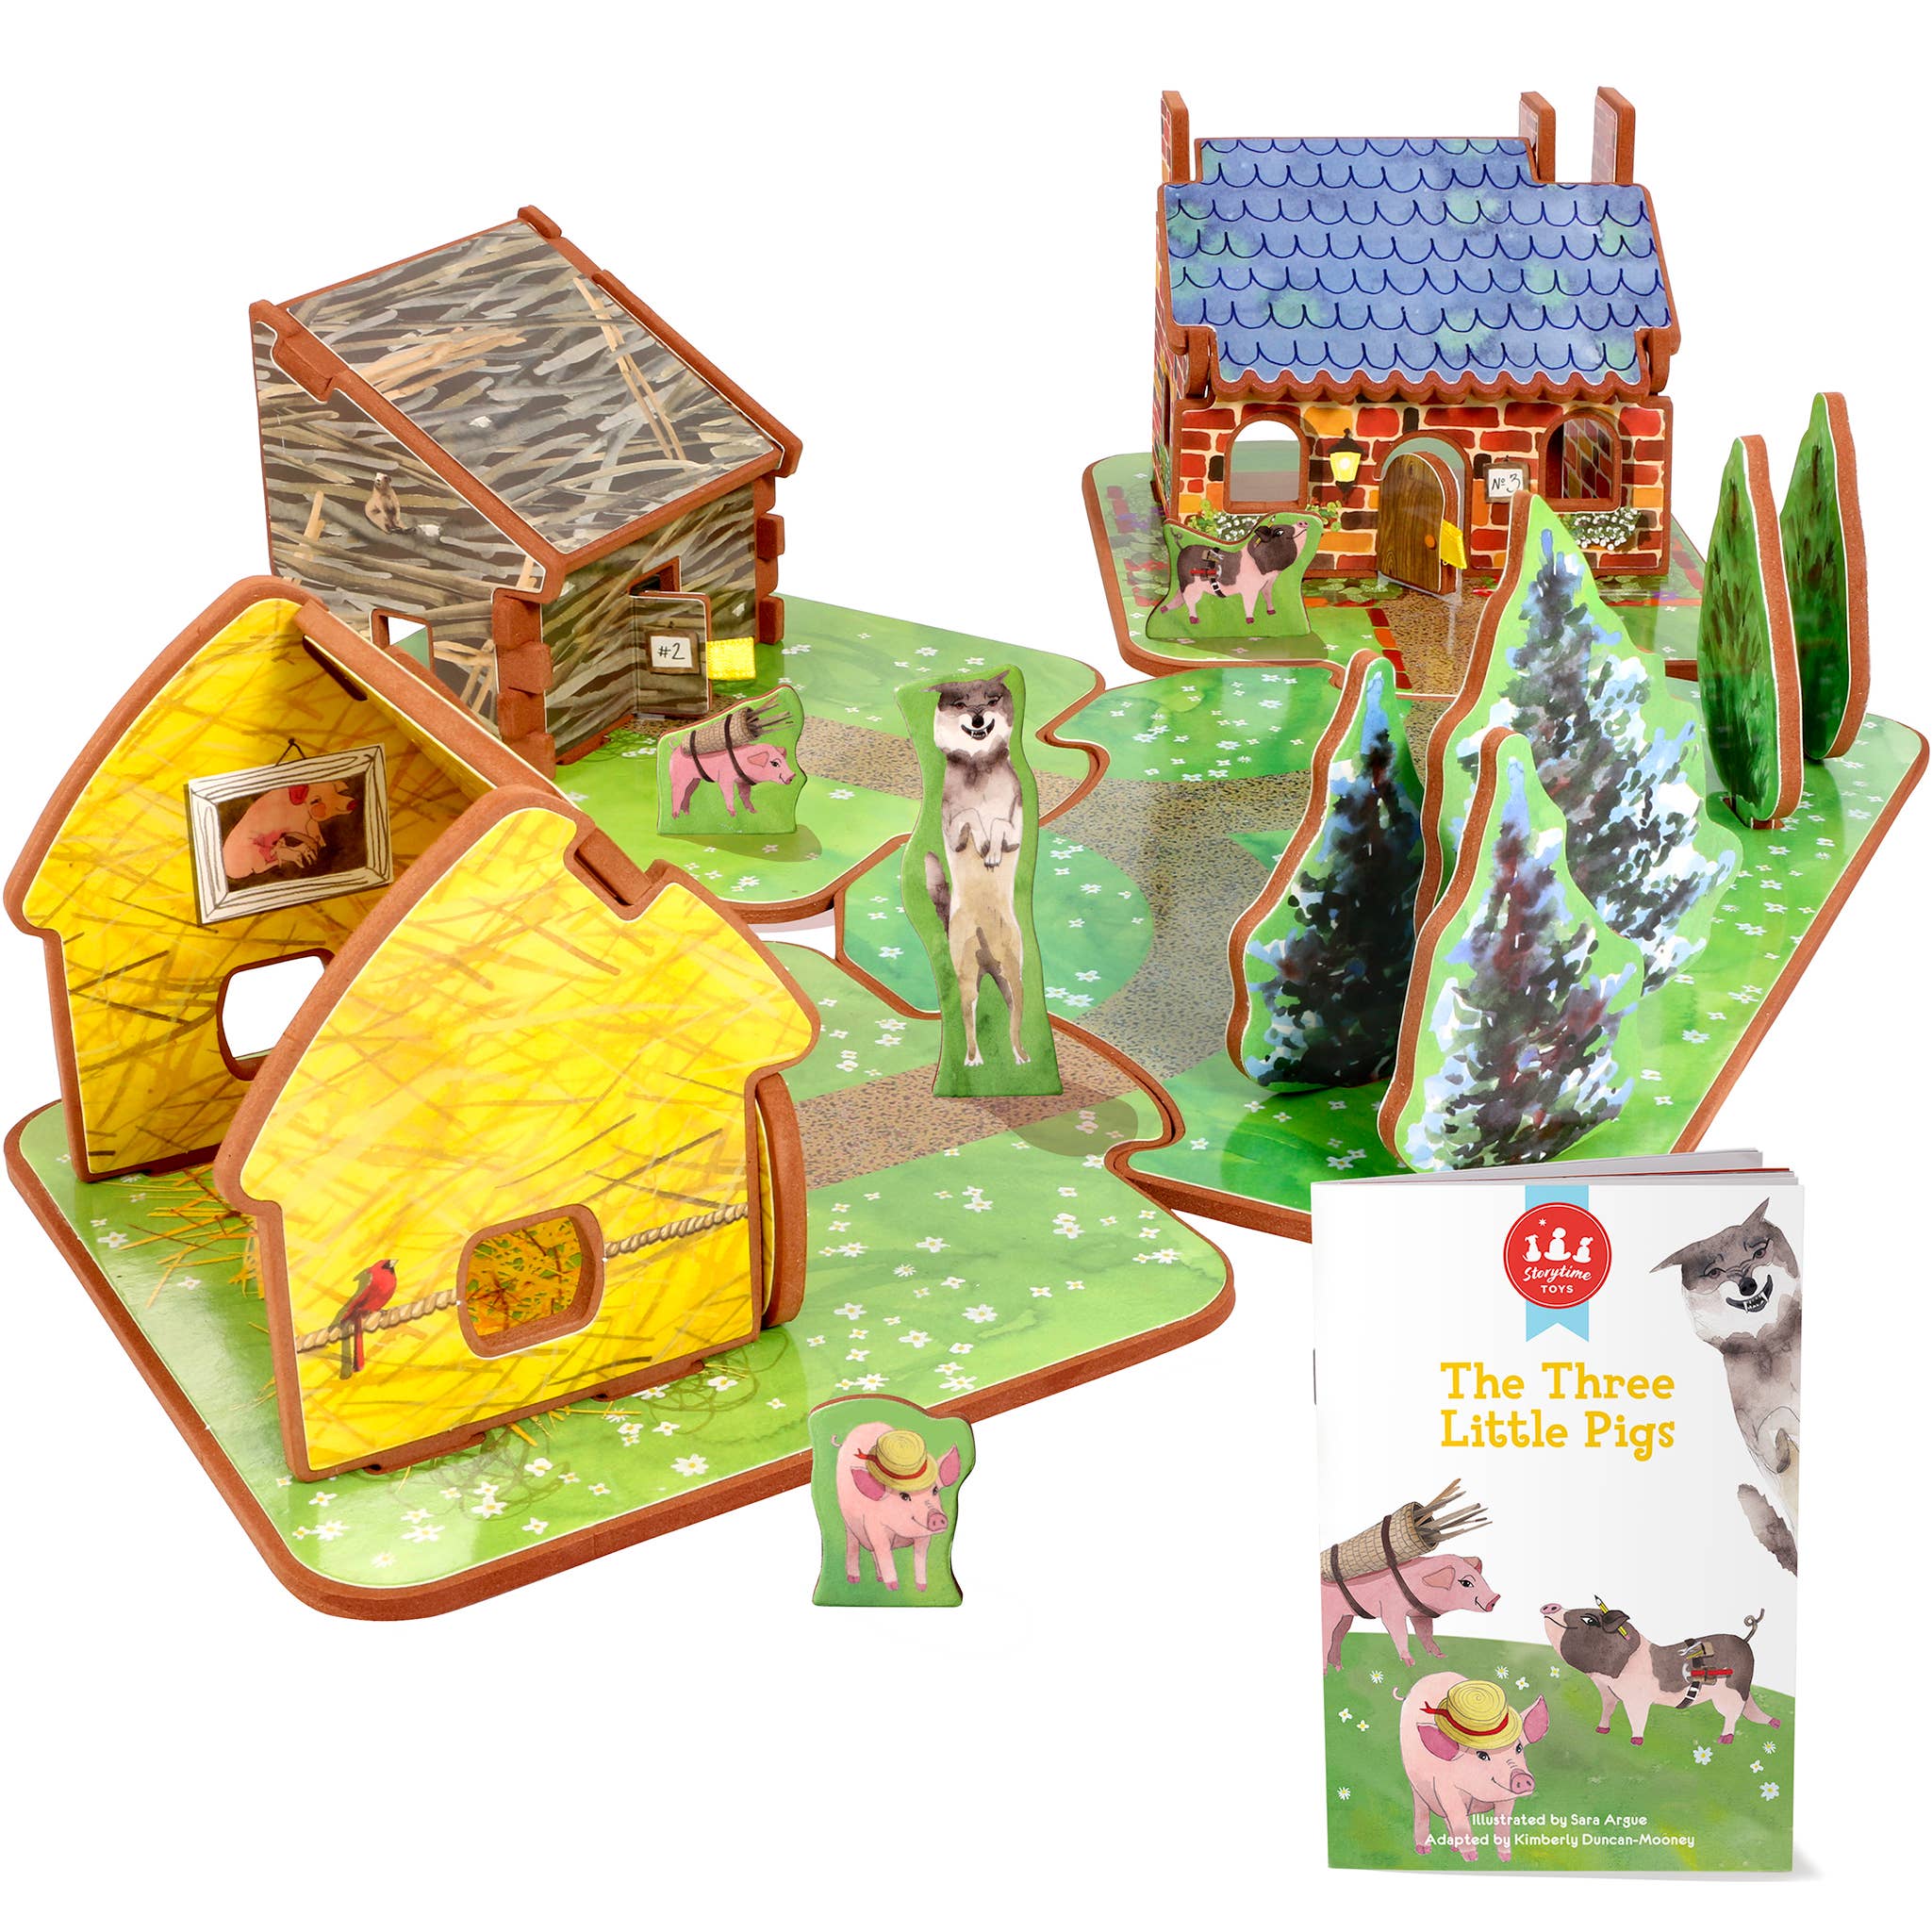 Thre Little Pigs Book and Play Set Product Image